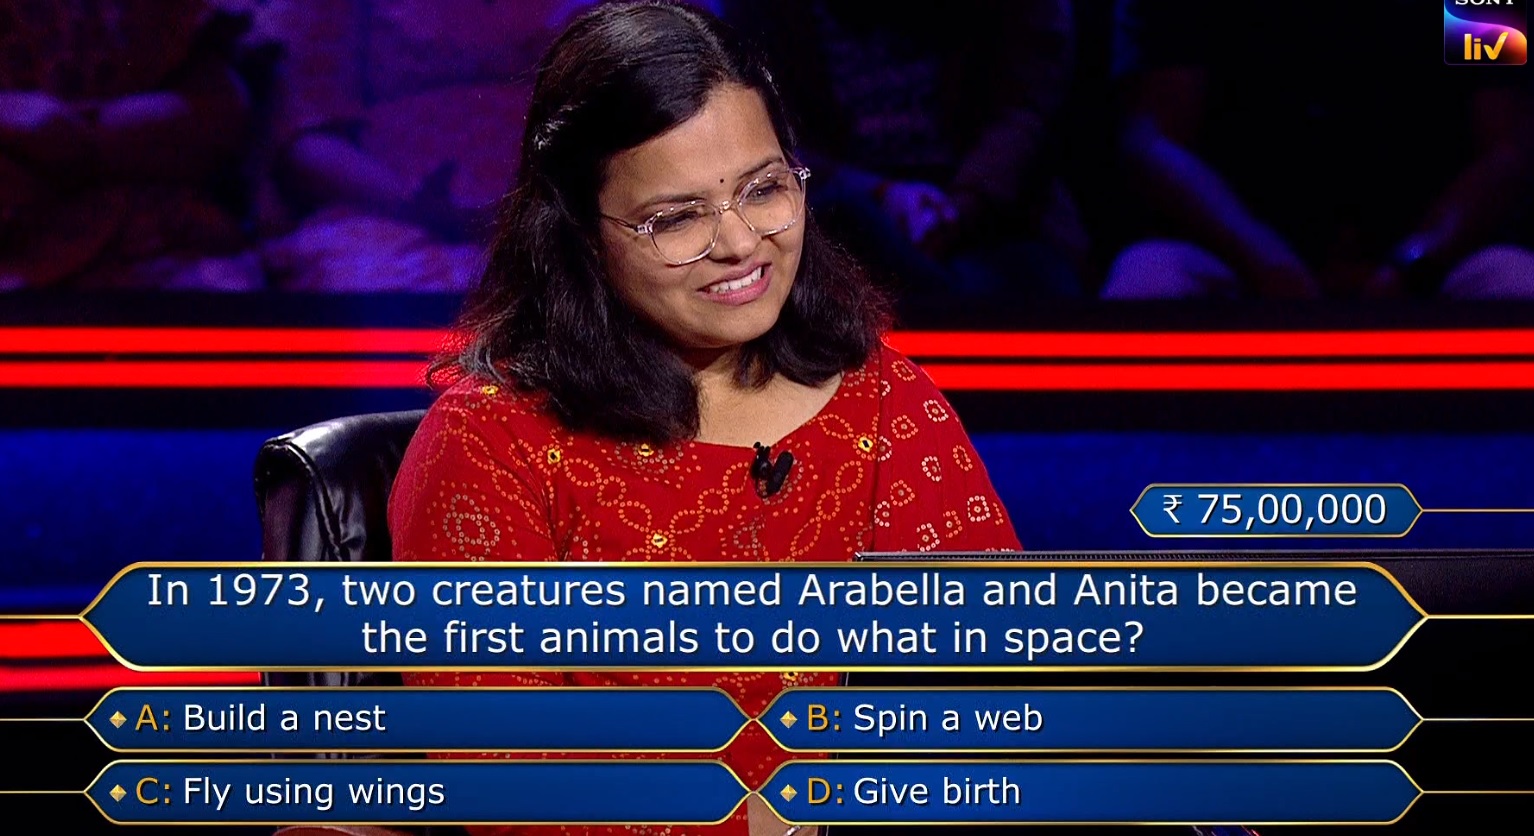 75 Lakh Ques : In 1973, two creatures named Arabella and Anita became the first animals to do what in space?